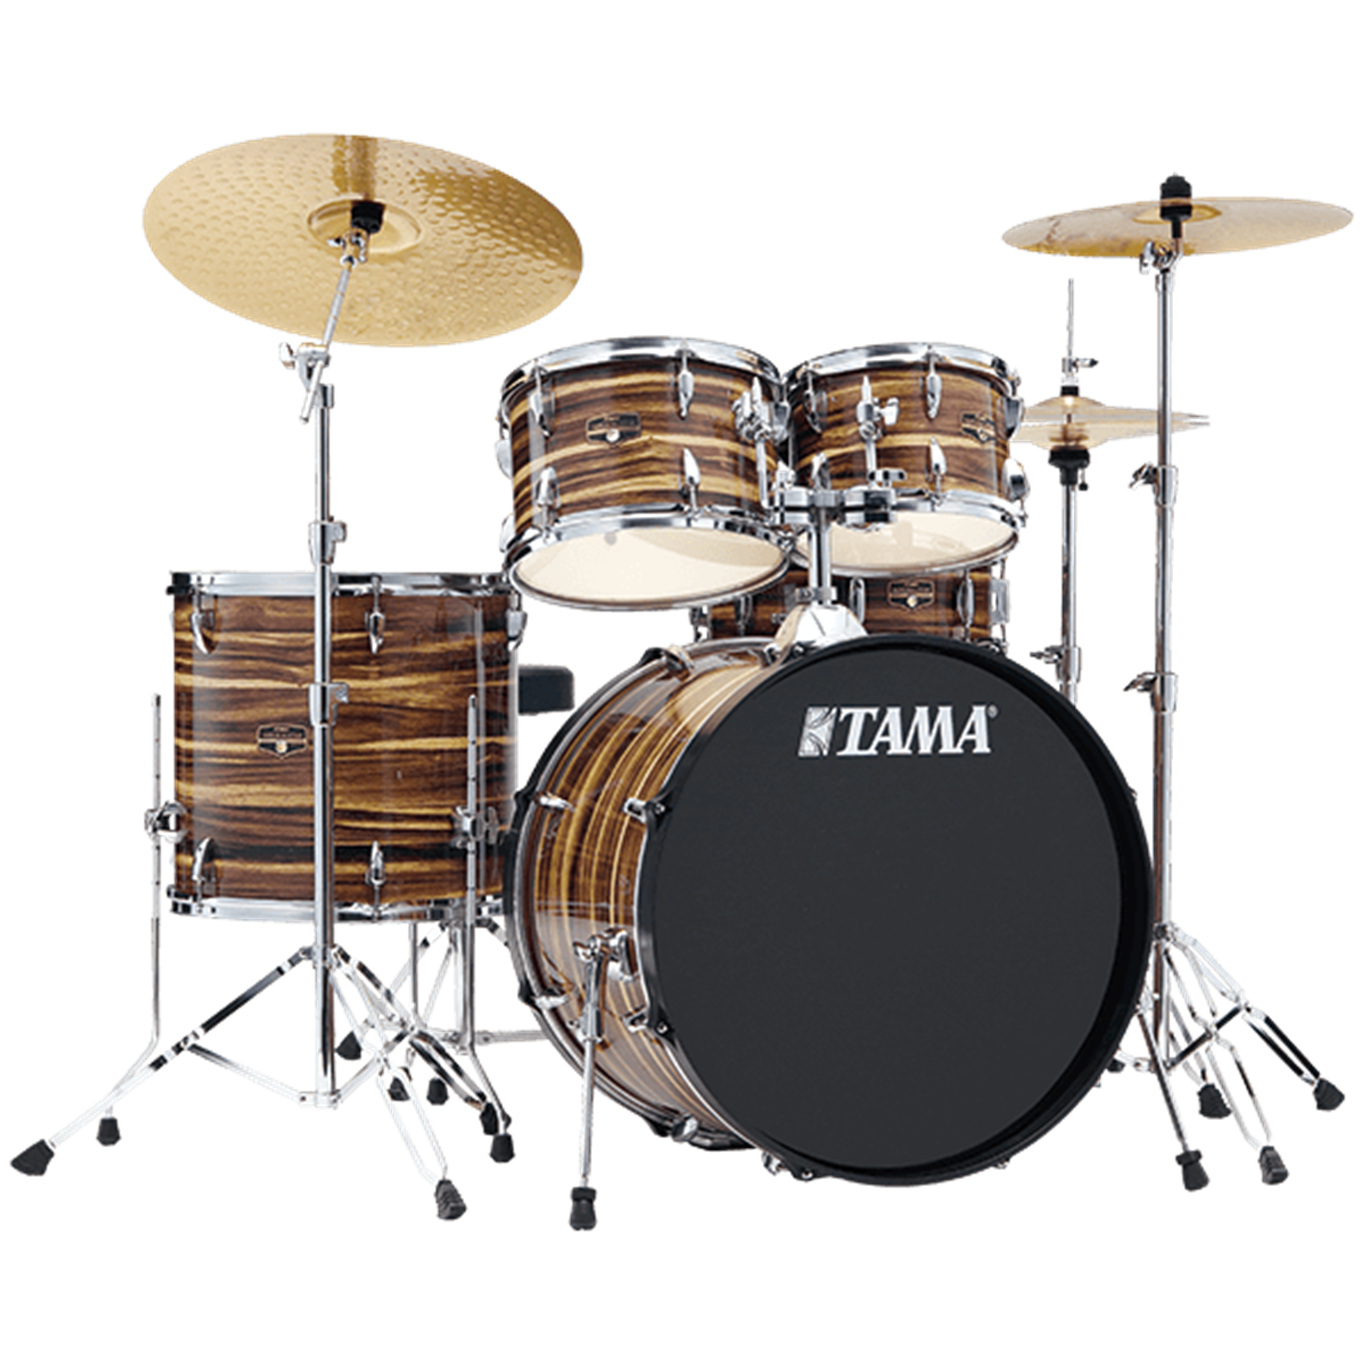 Tama Imperialstar IE52CCTW 5pc Complete Drum Set 22" Bass Drum w/ Hardware and Cymbals